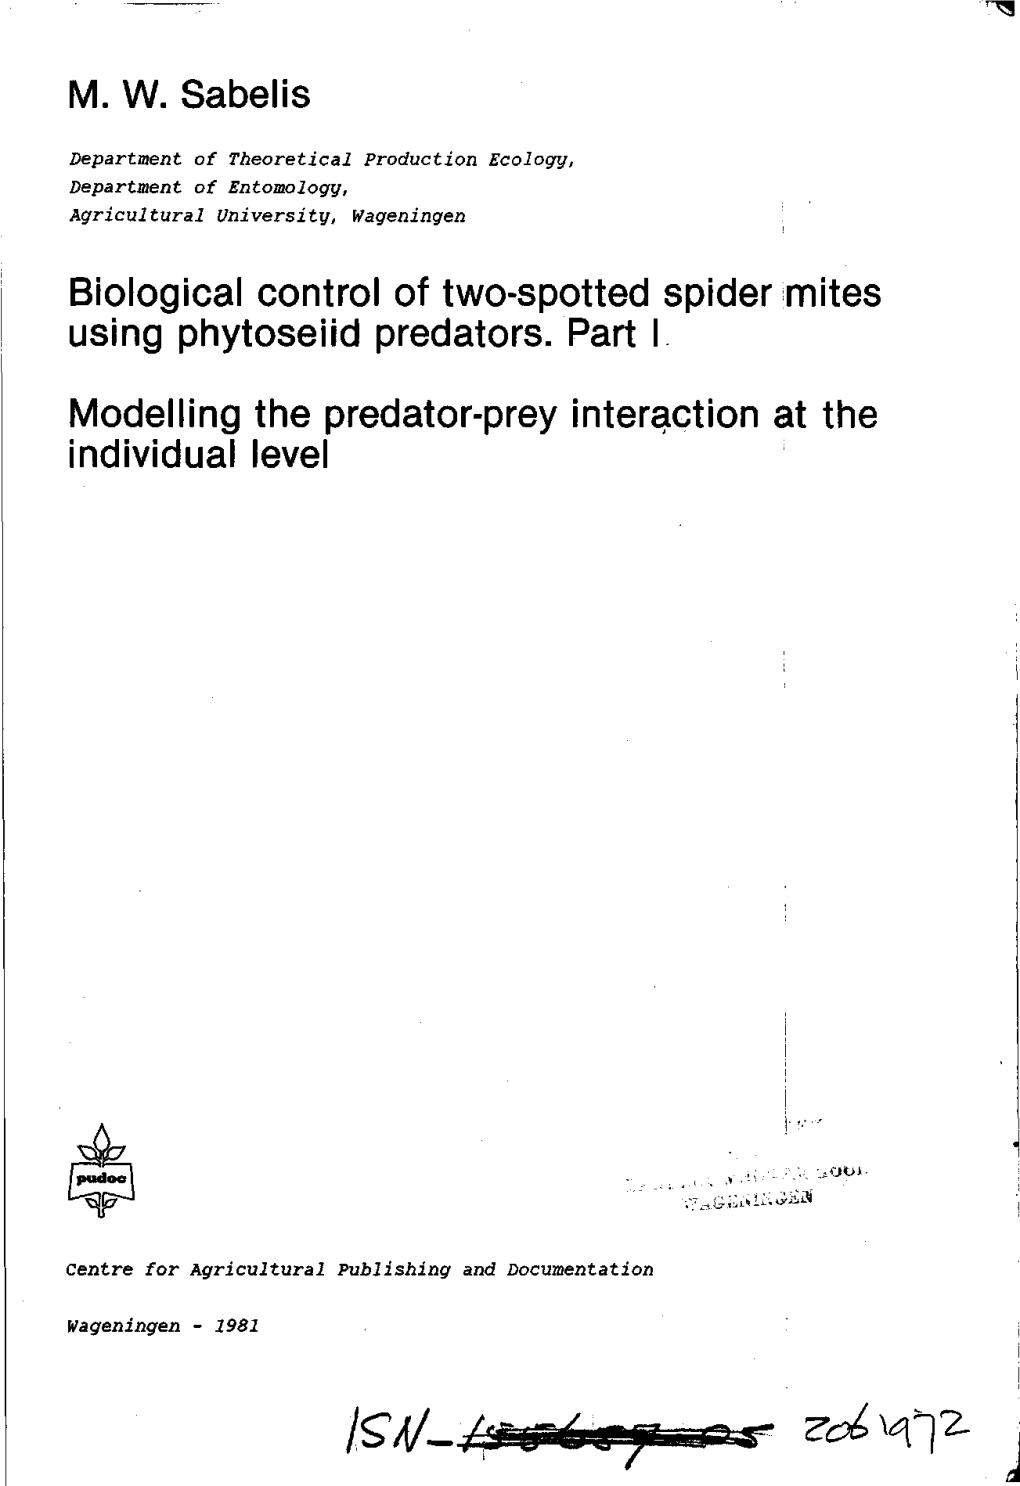 Biological Control of Two-Spotted Spider Mites Using Phytoseiid Predators